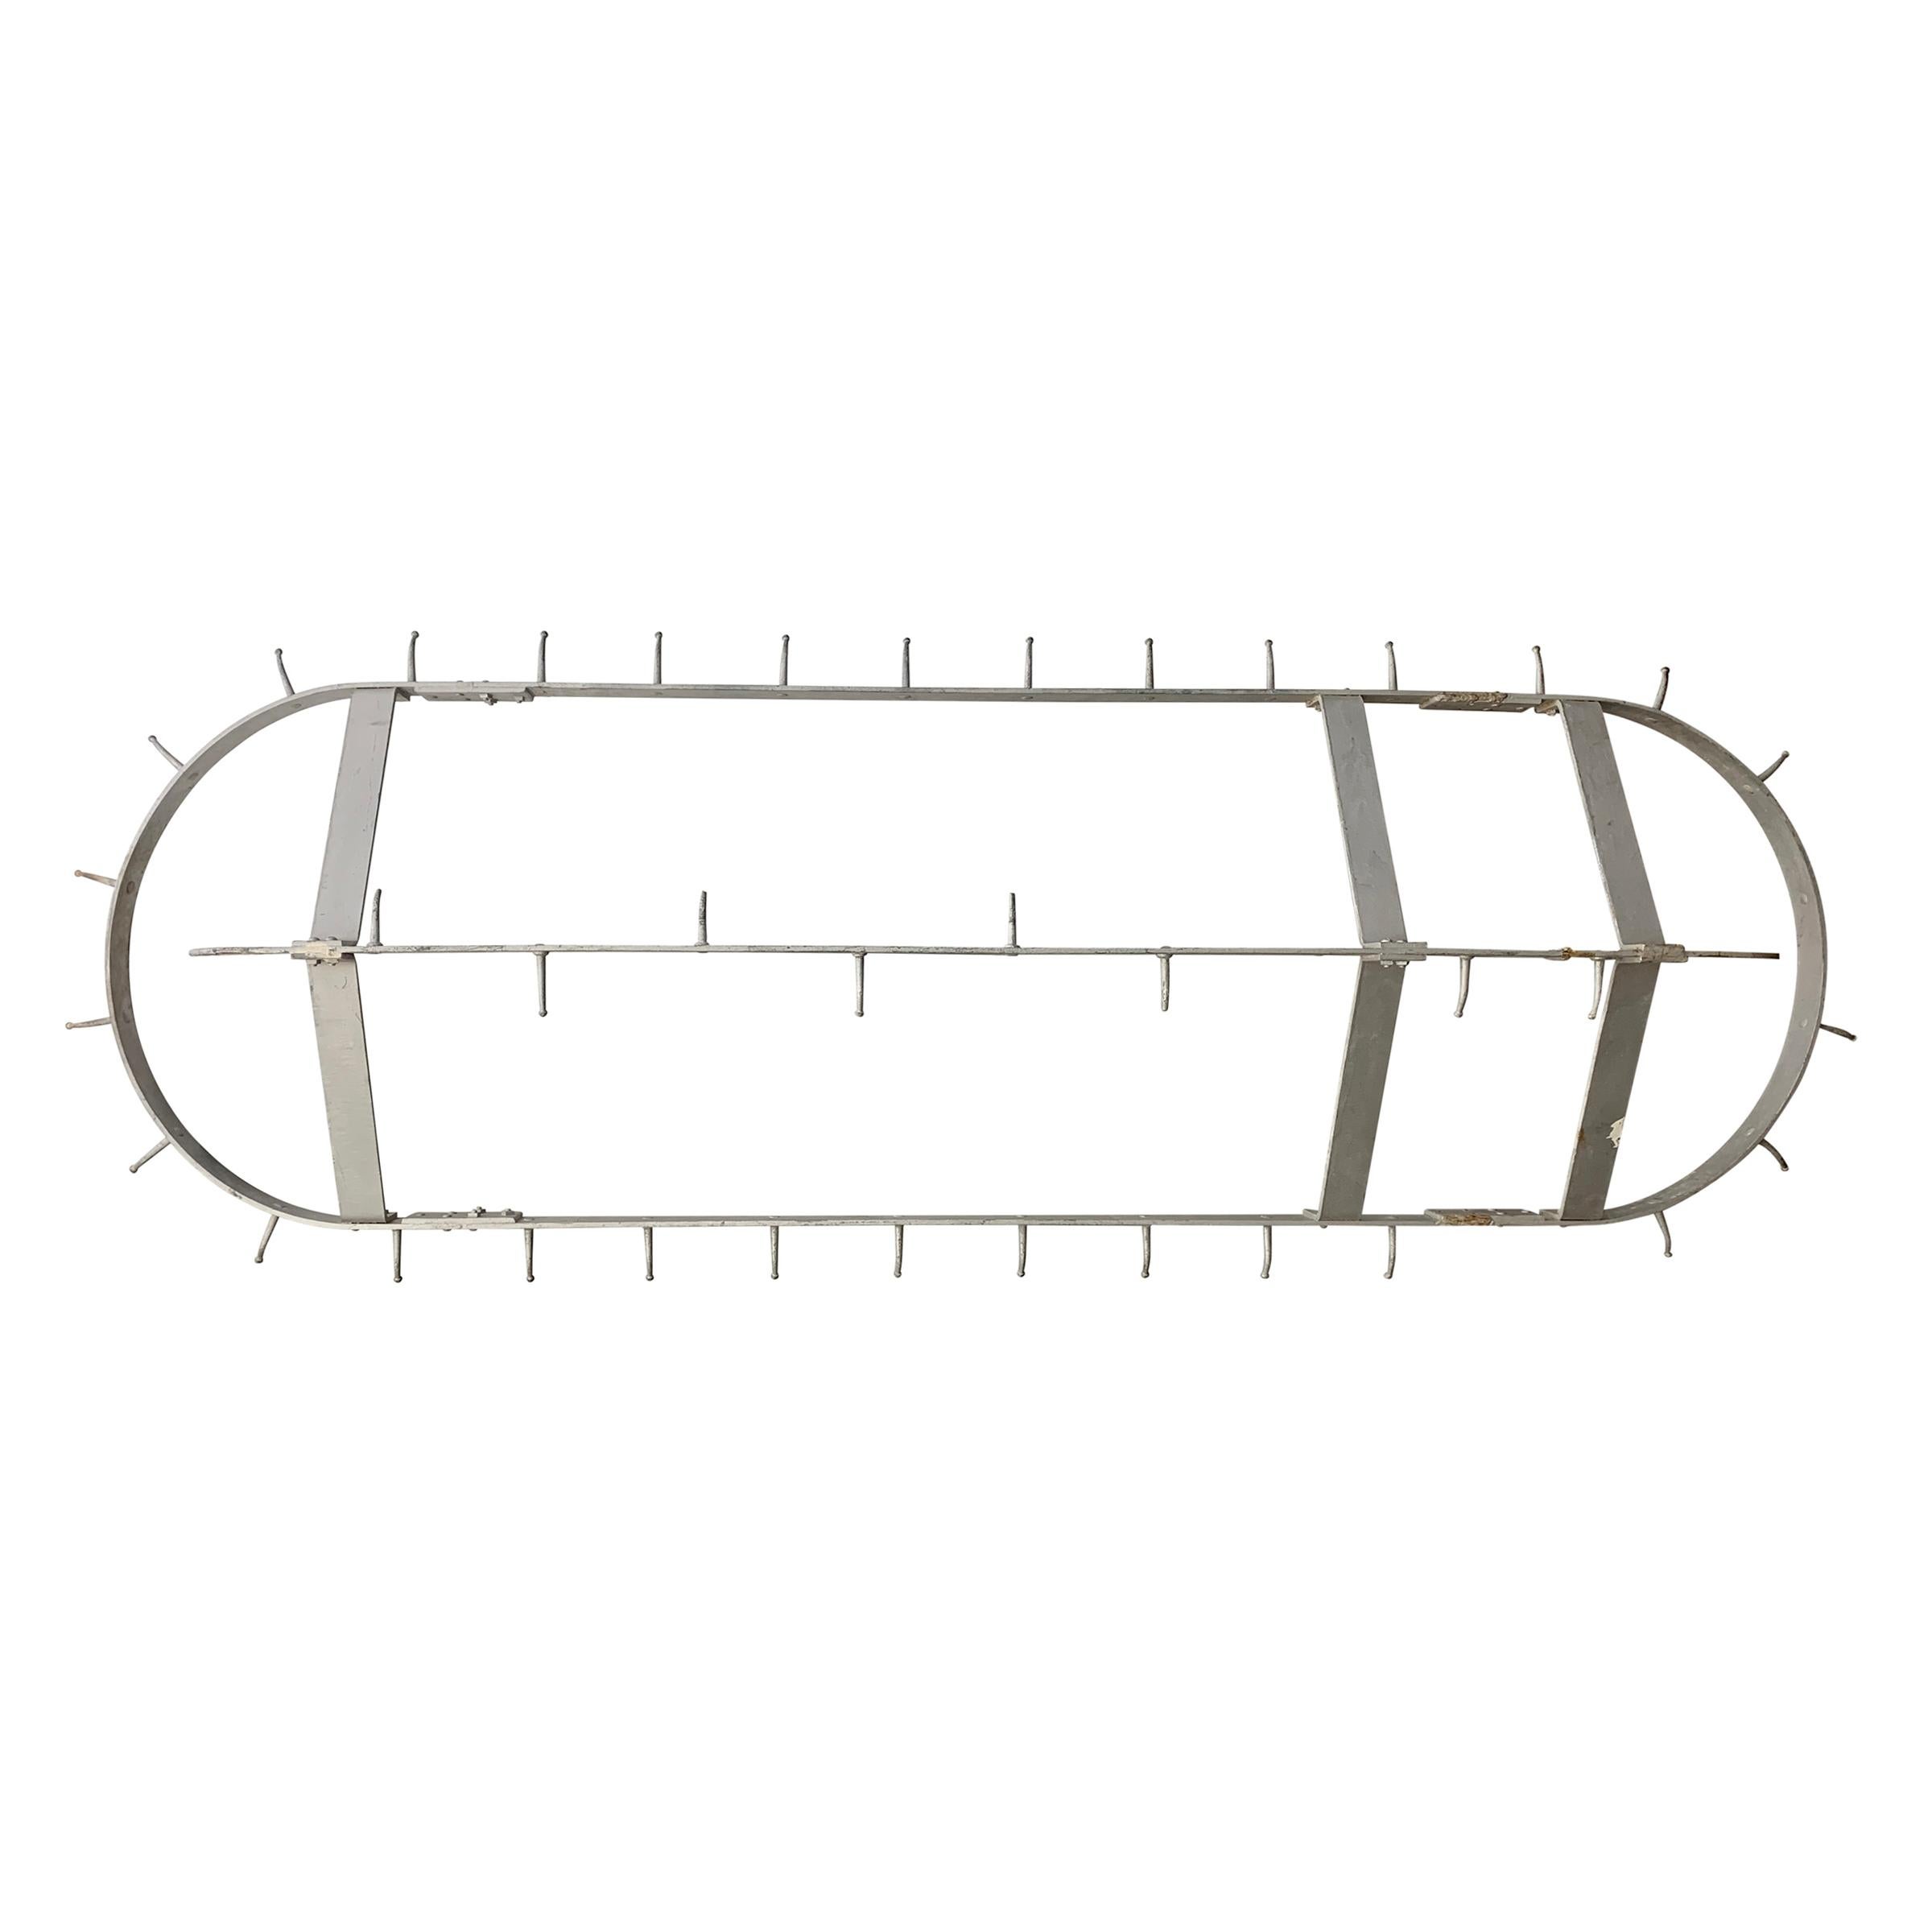 20th Century American Industrial Pot Rack For Sale